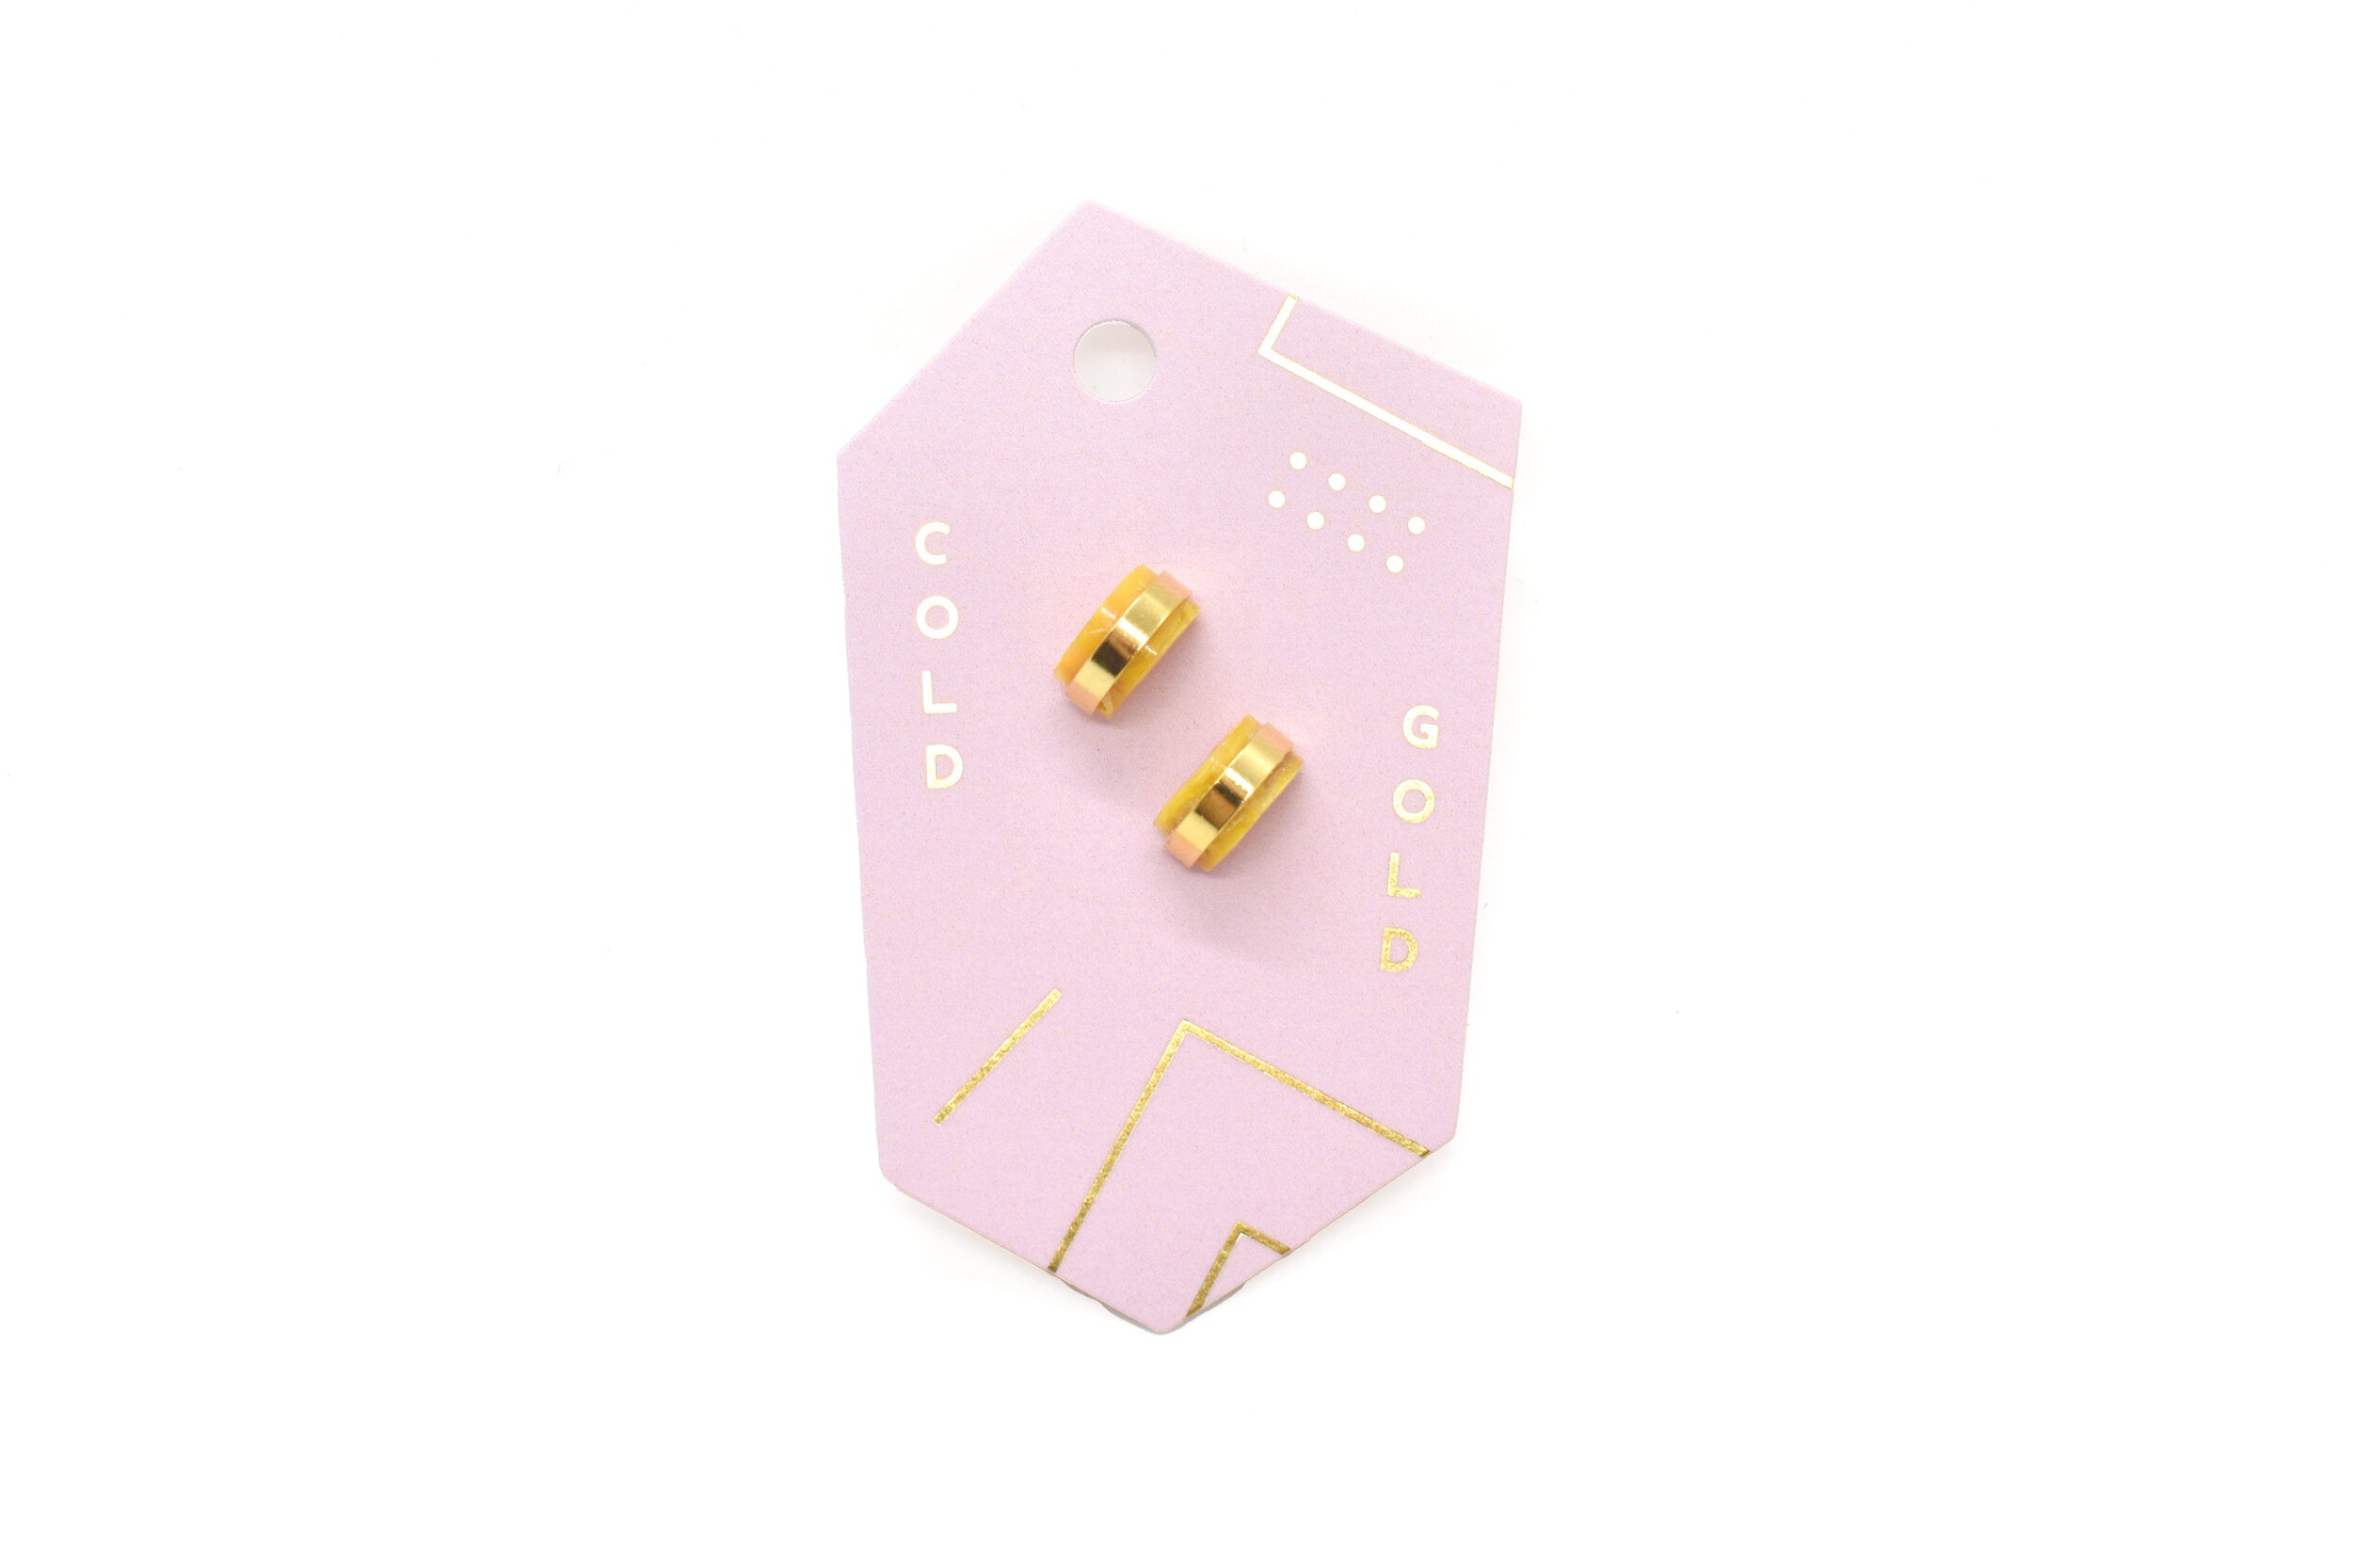 pink geometric card with marbled yellow clay stud earring set birthstone gemstone earring